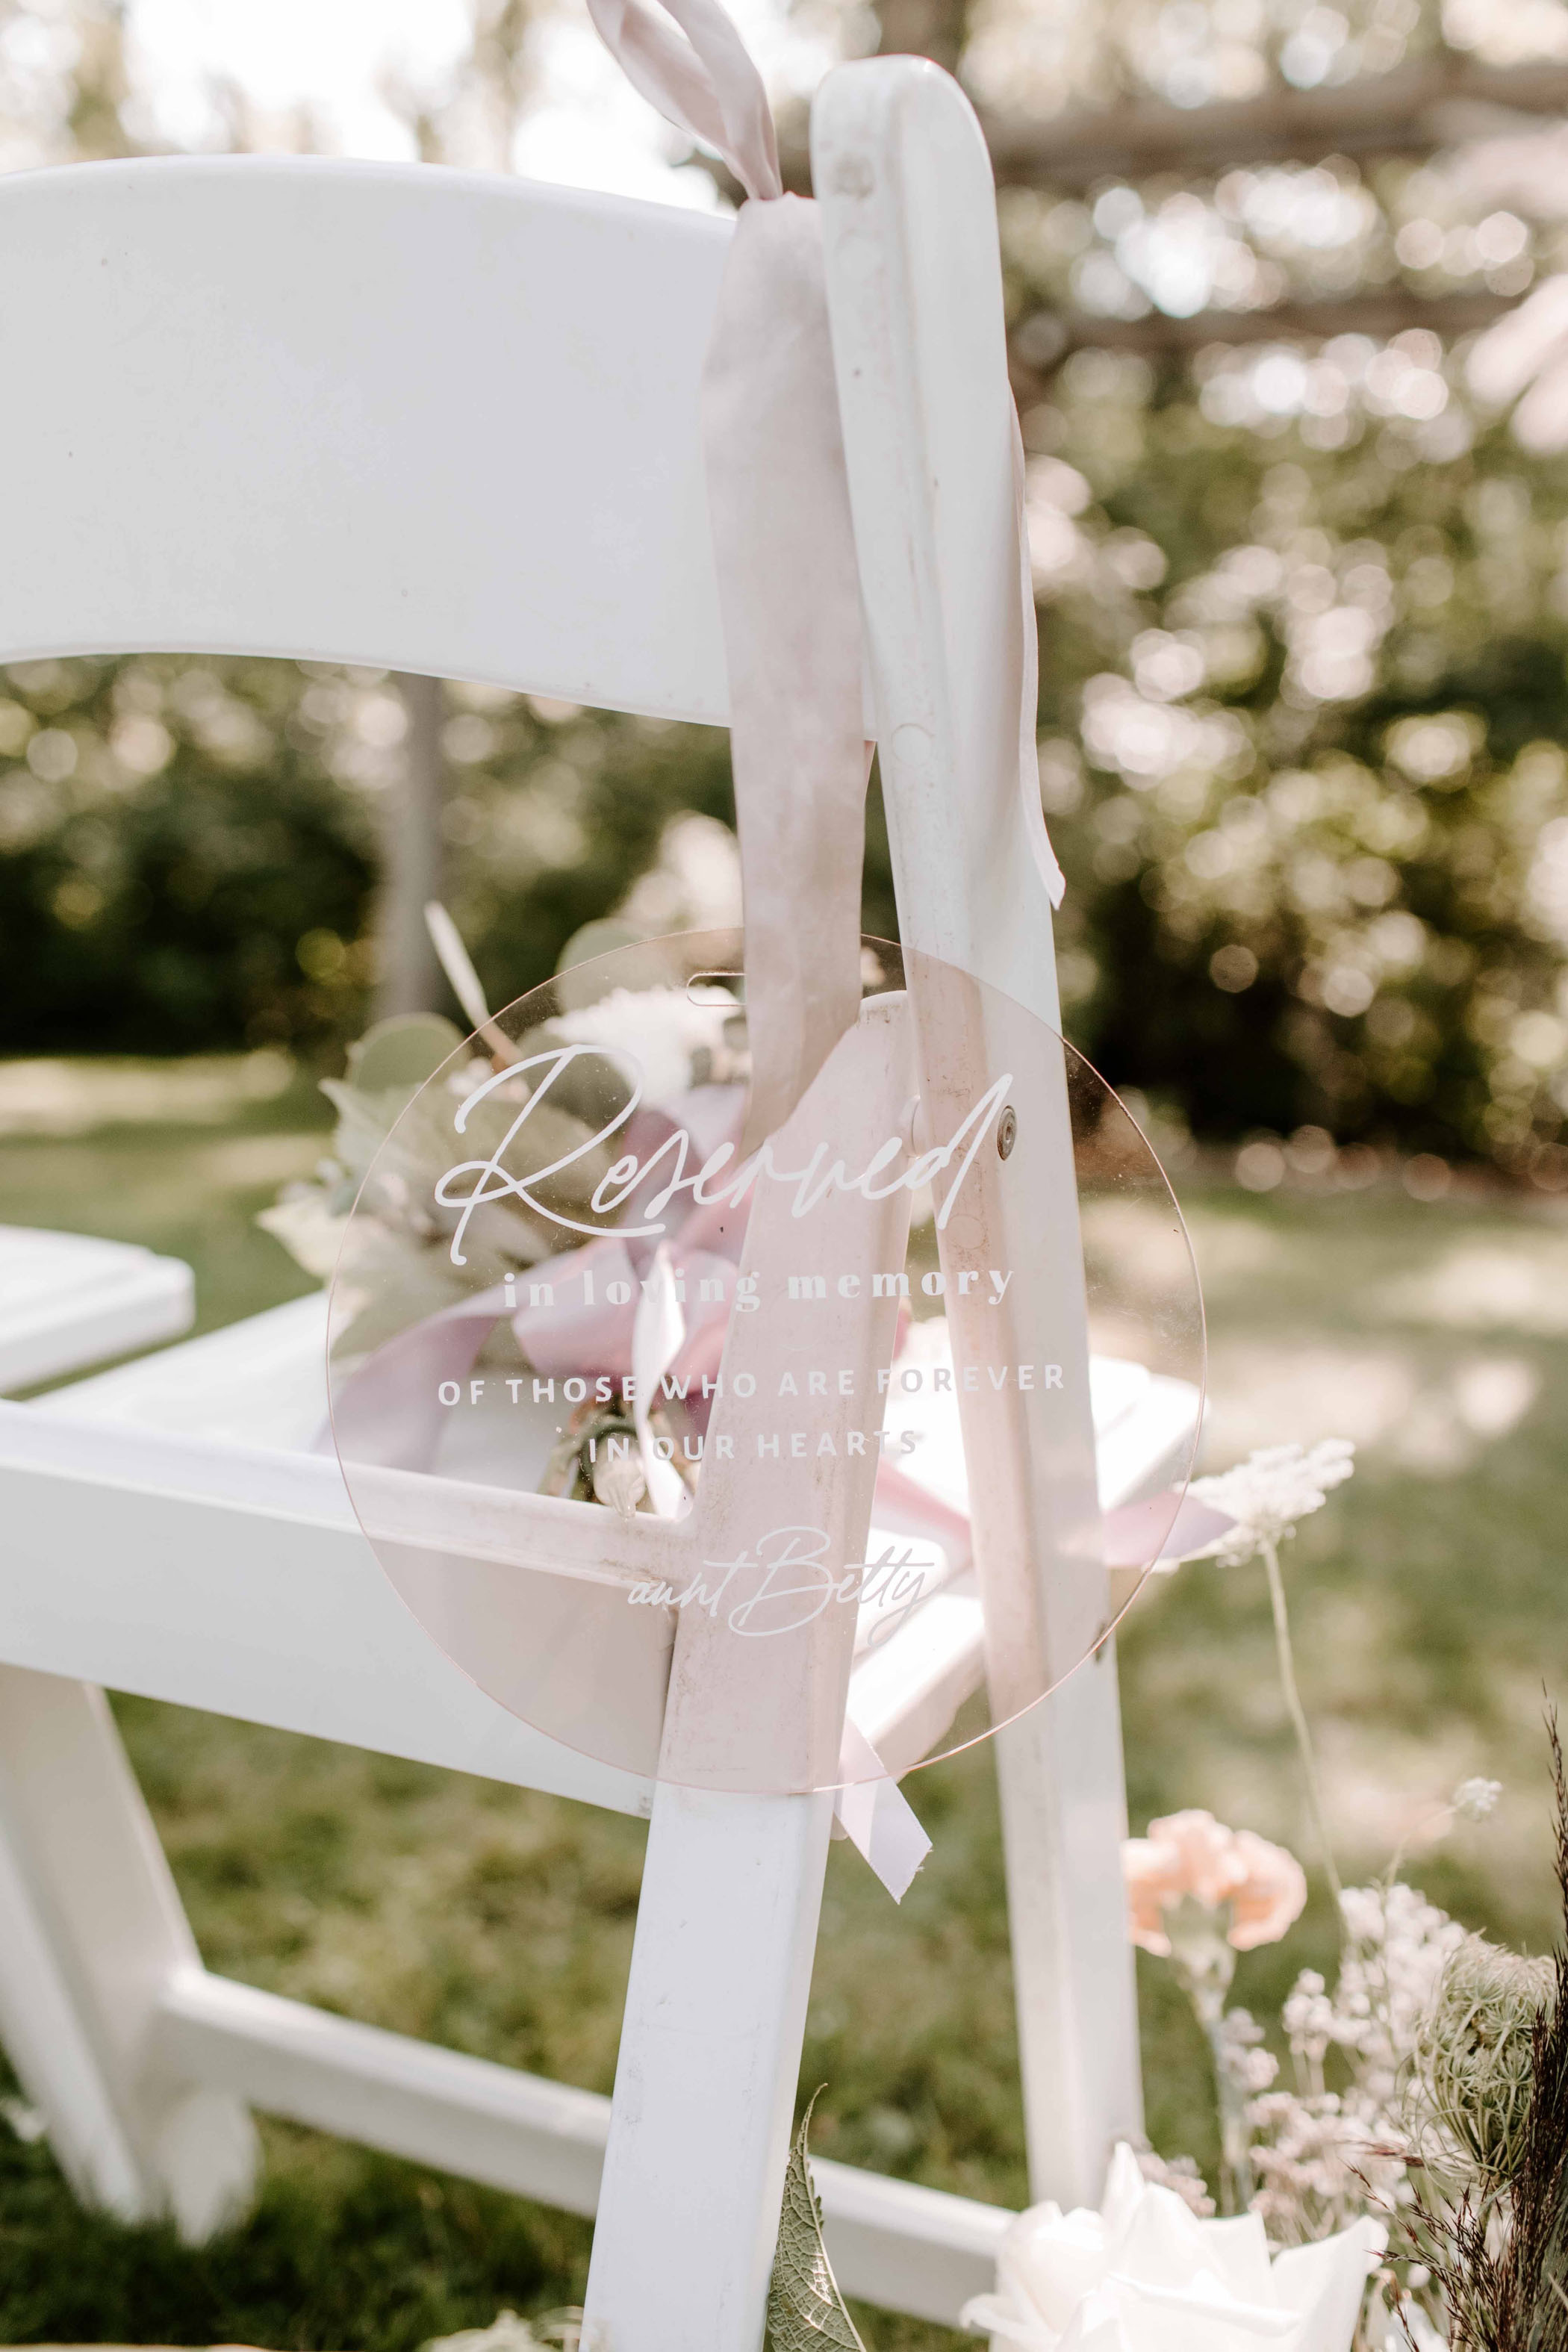 White wedding chair with a pink acrylic reservation note